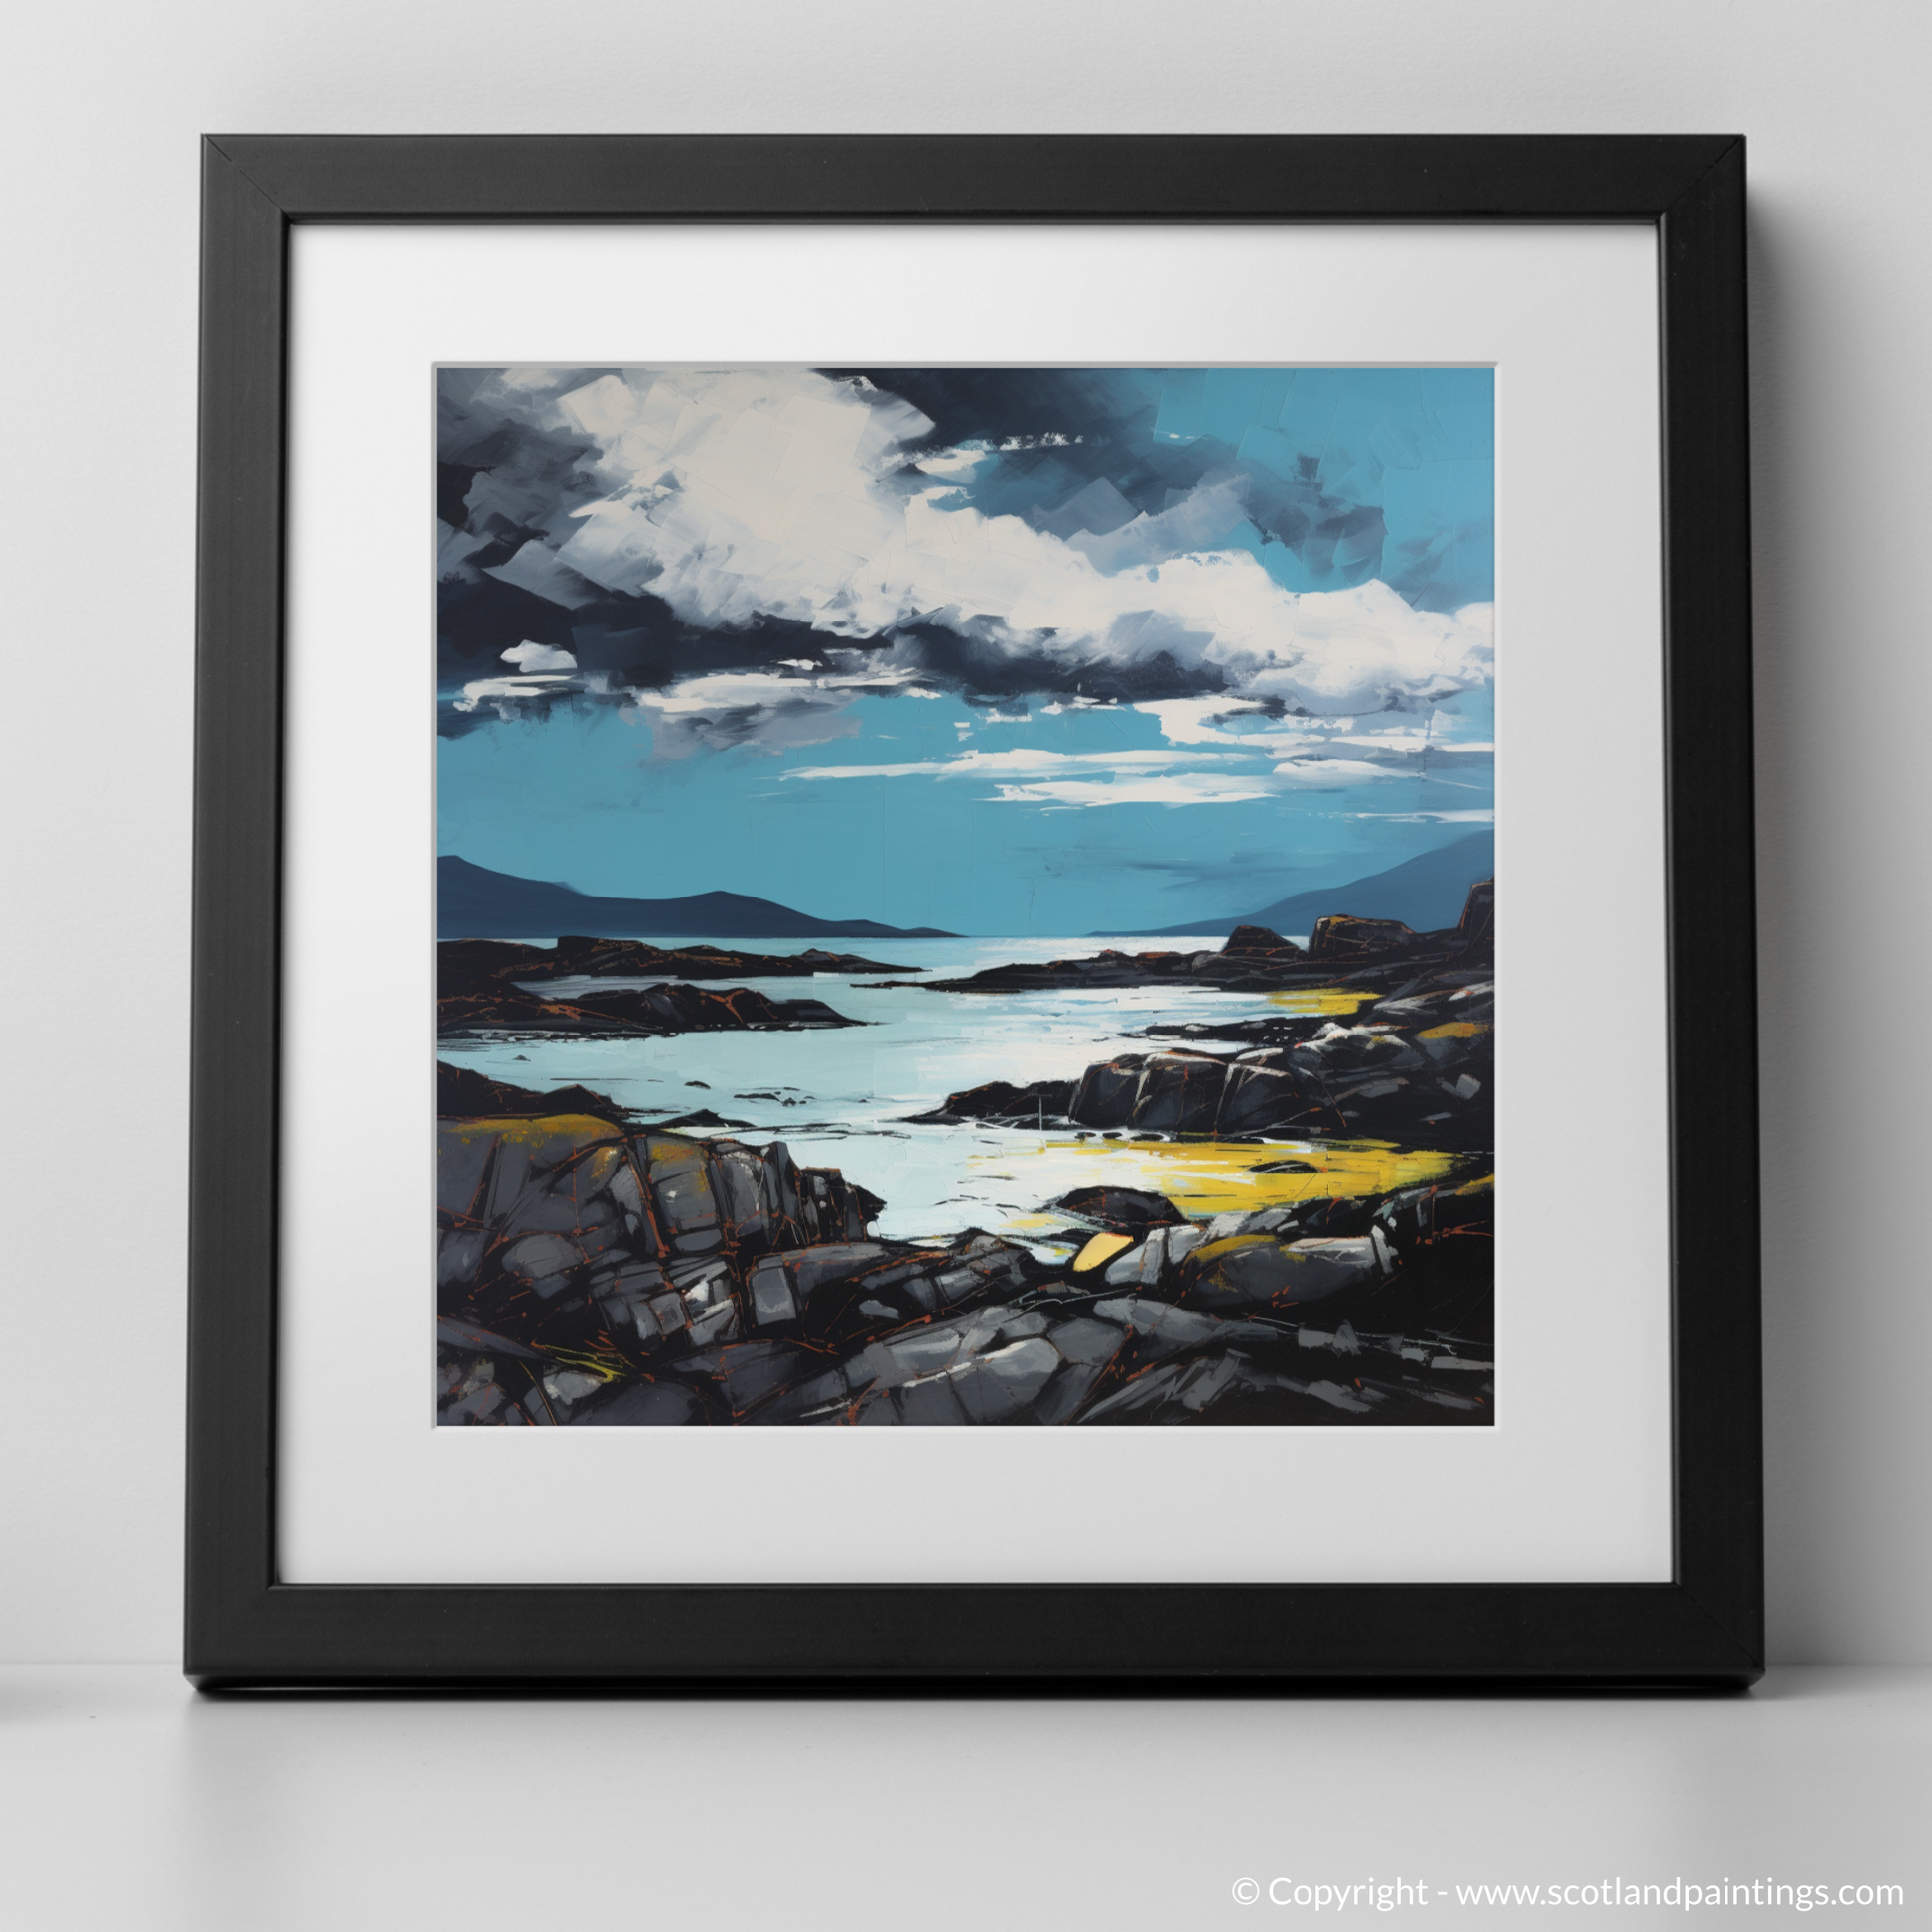 Art Print of Isle of Harris, Outer Hebrides with a black frame